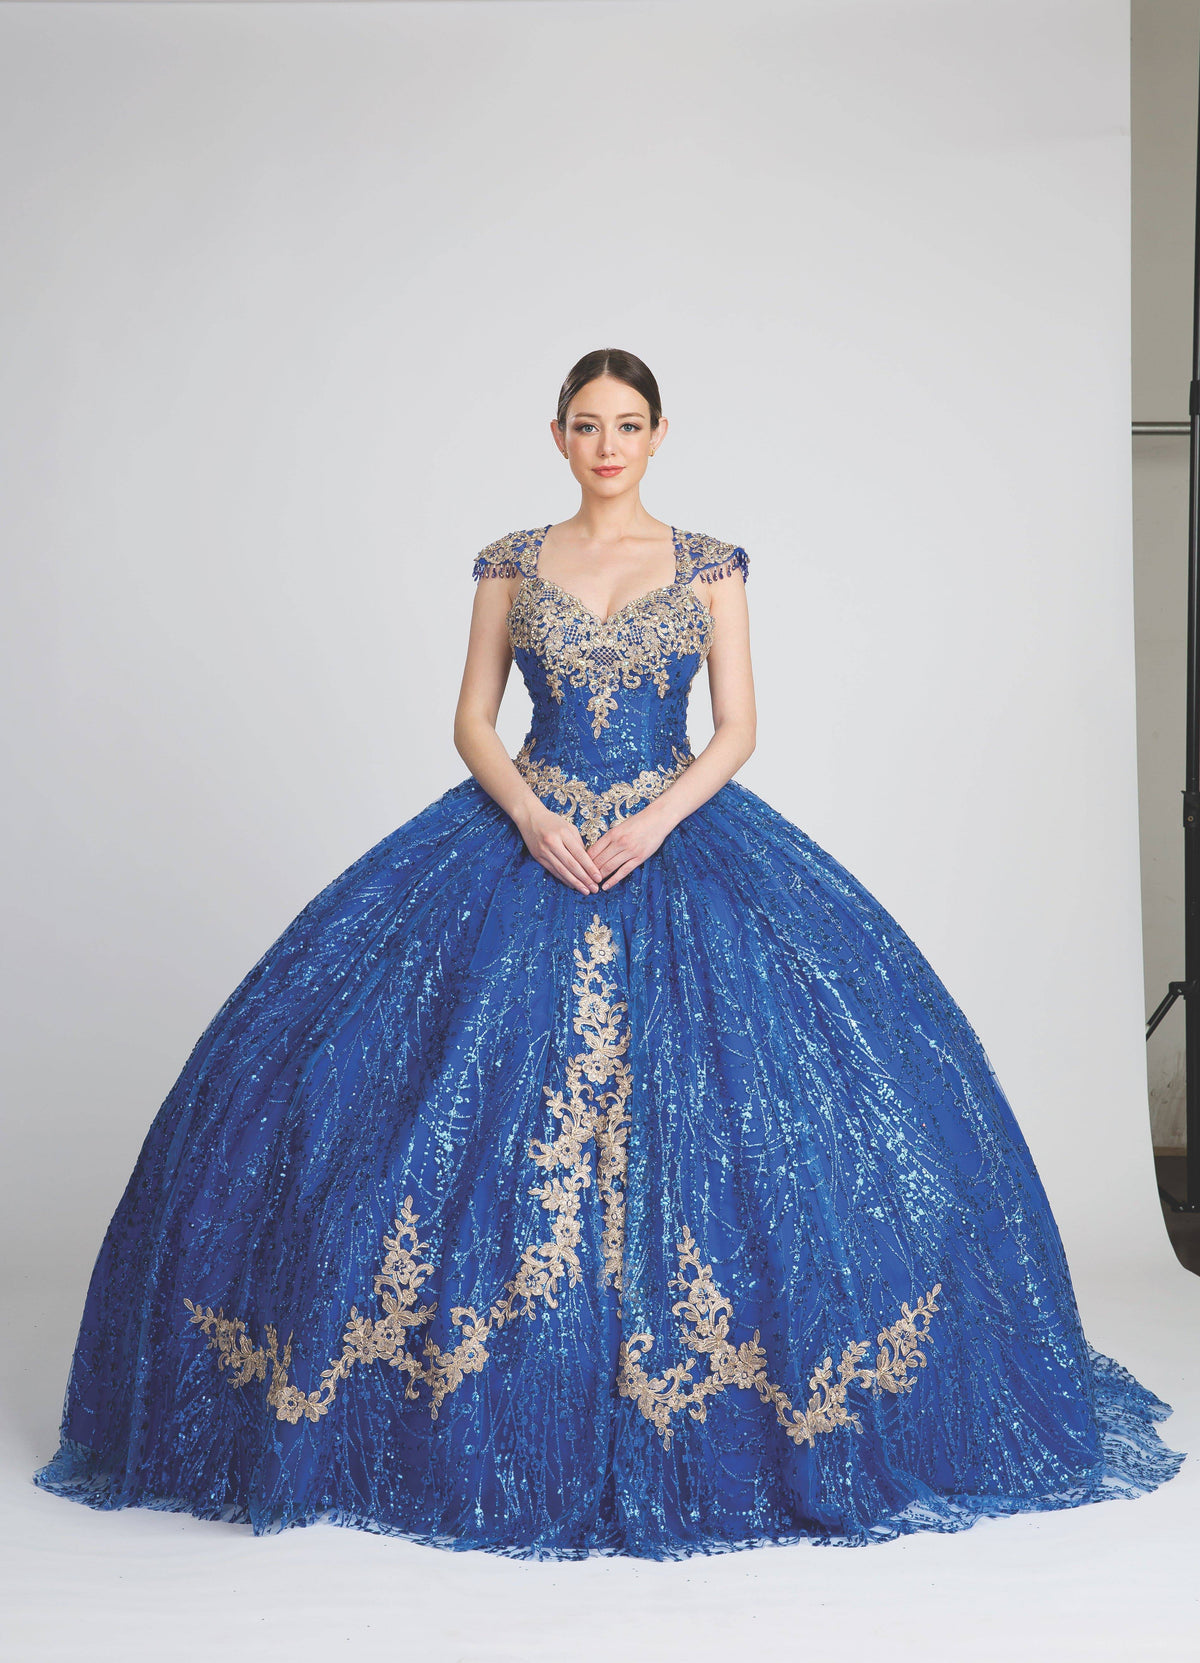 Fiesta 10262 Sequin & Floral Lace Embroidered Ball Gown - NORMA REED